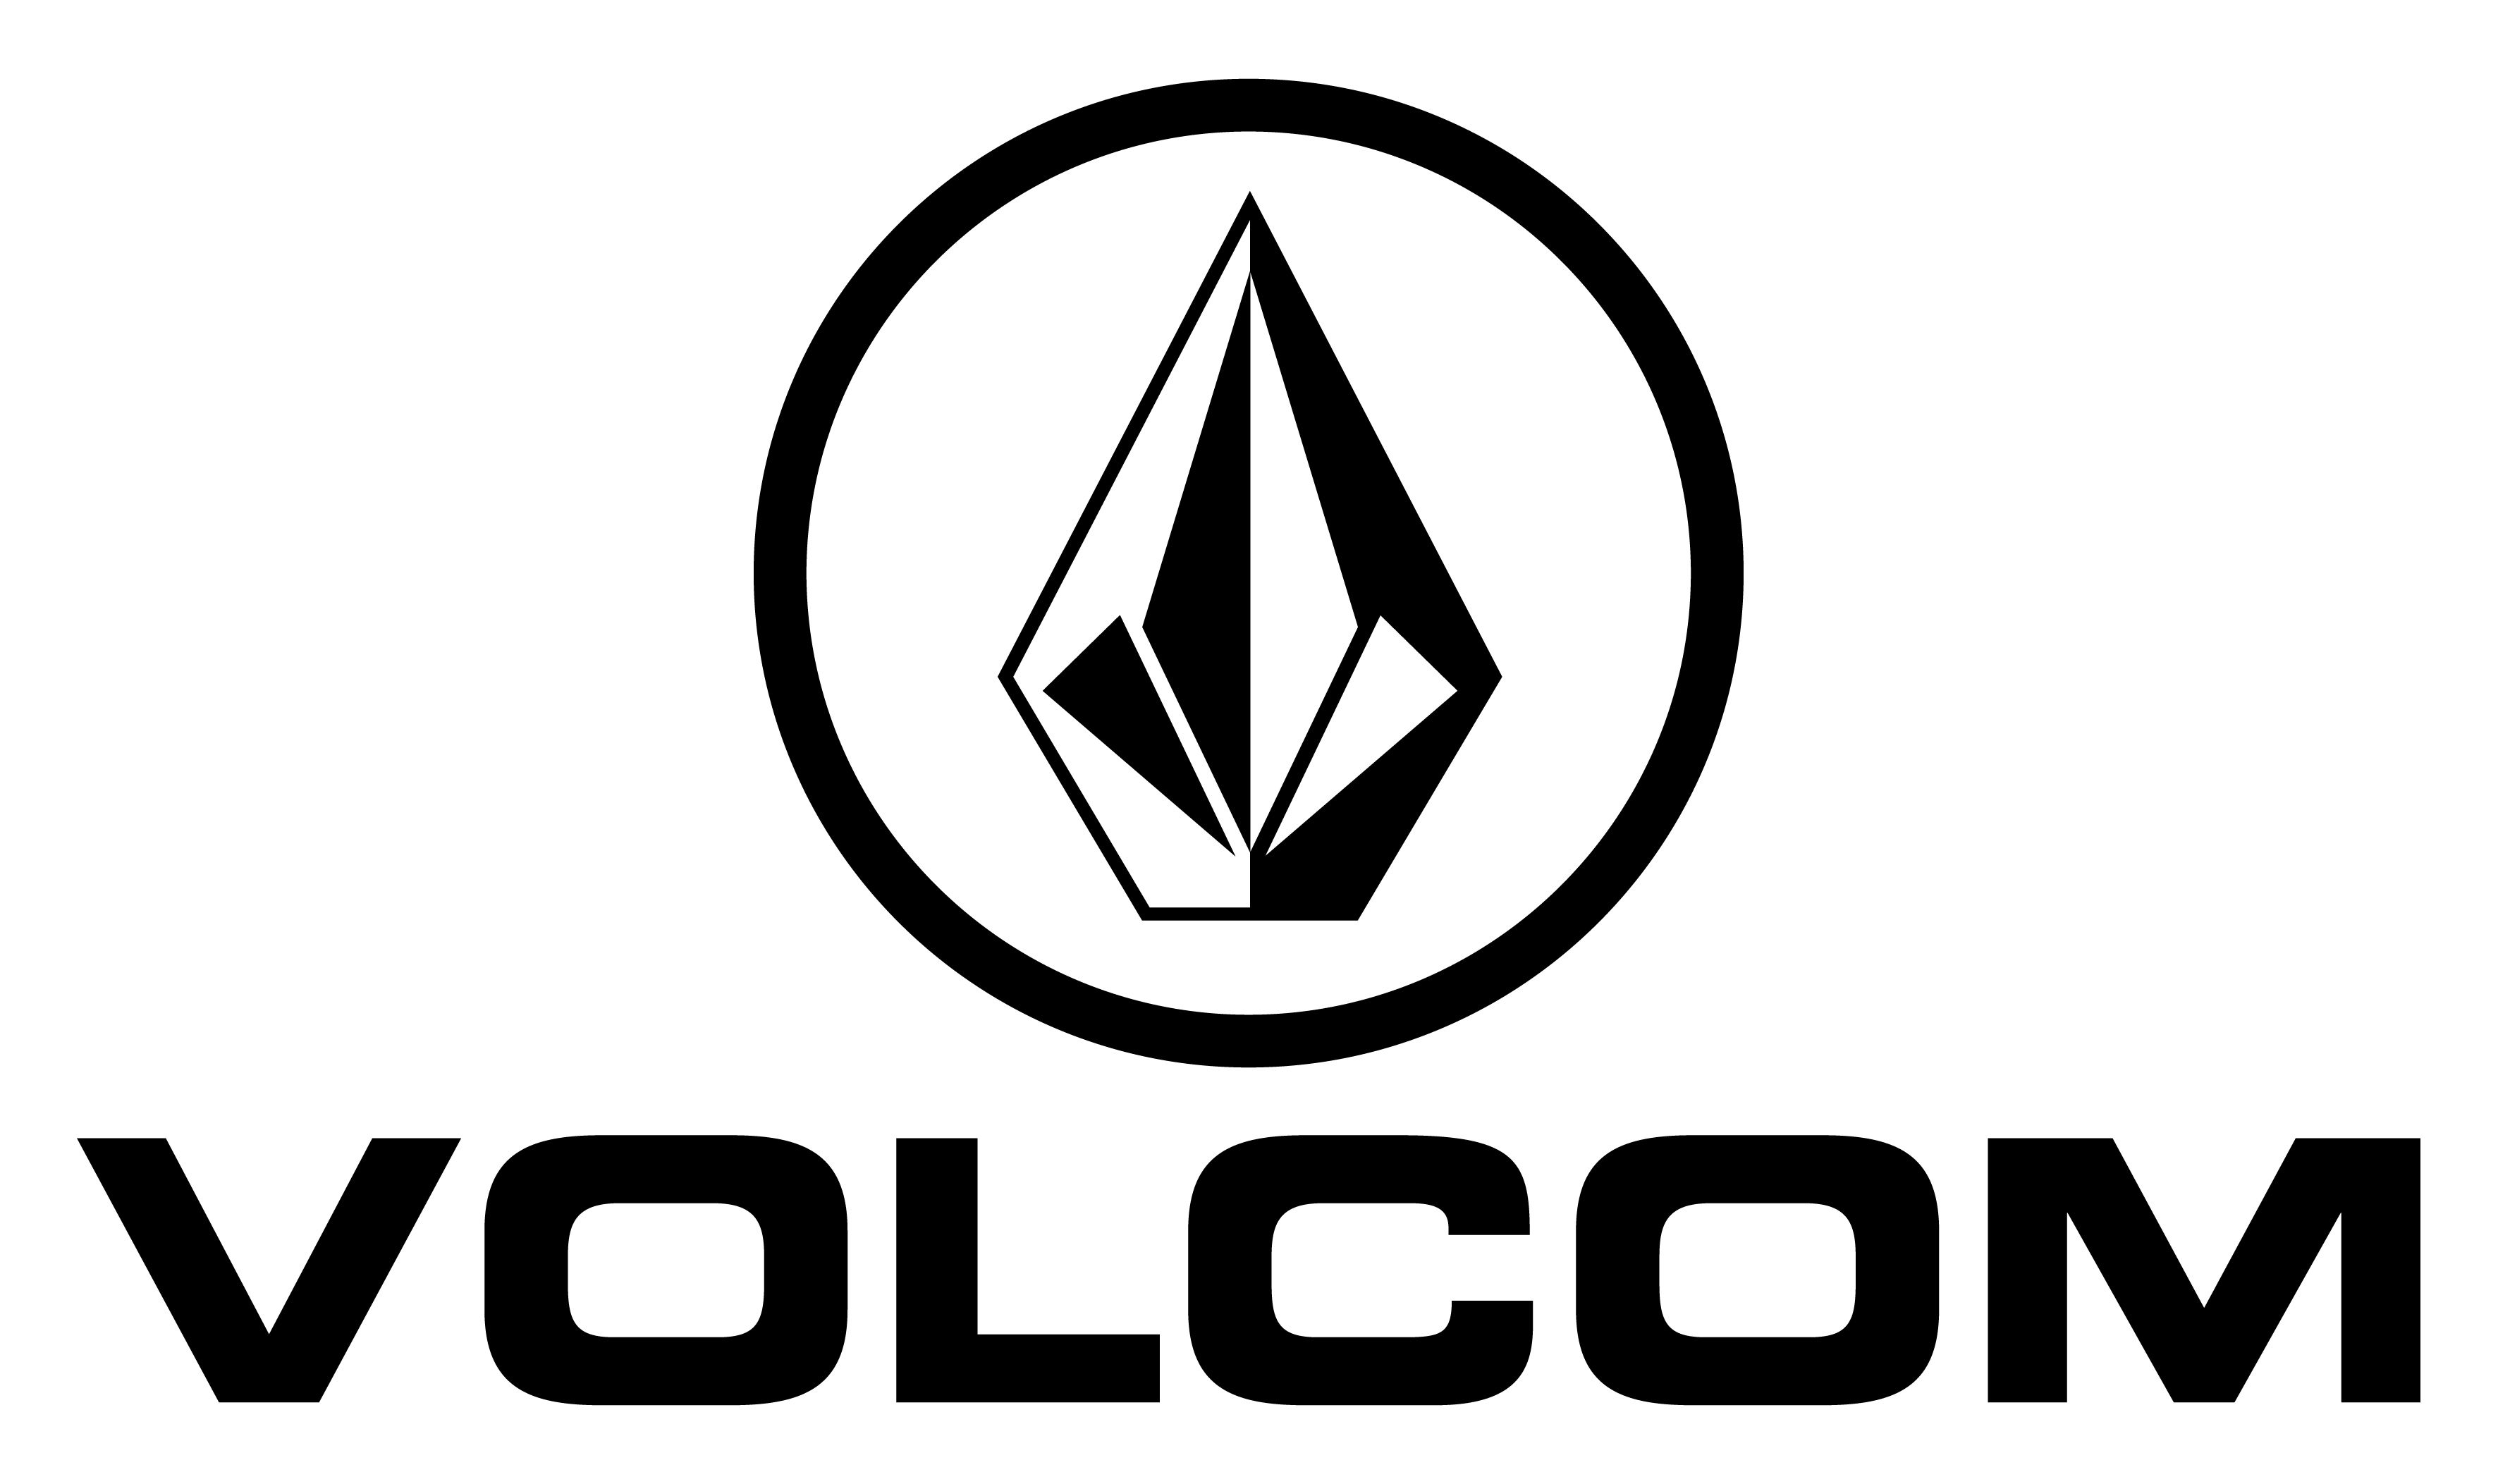 Volcom Logo HD Wallpapers Pictures Backgrounds Images Collection.